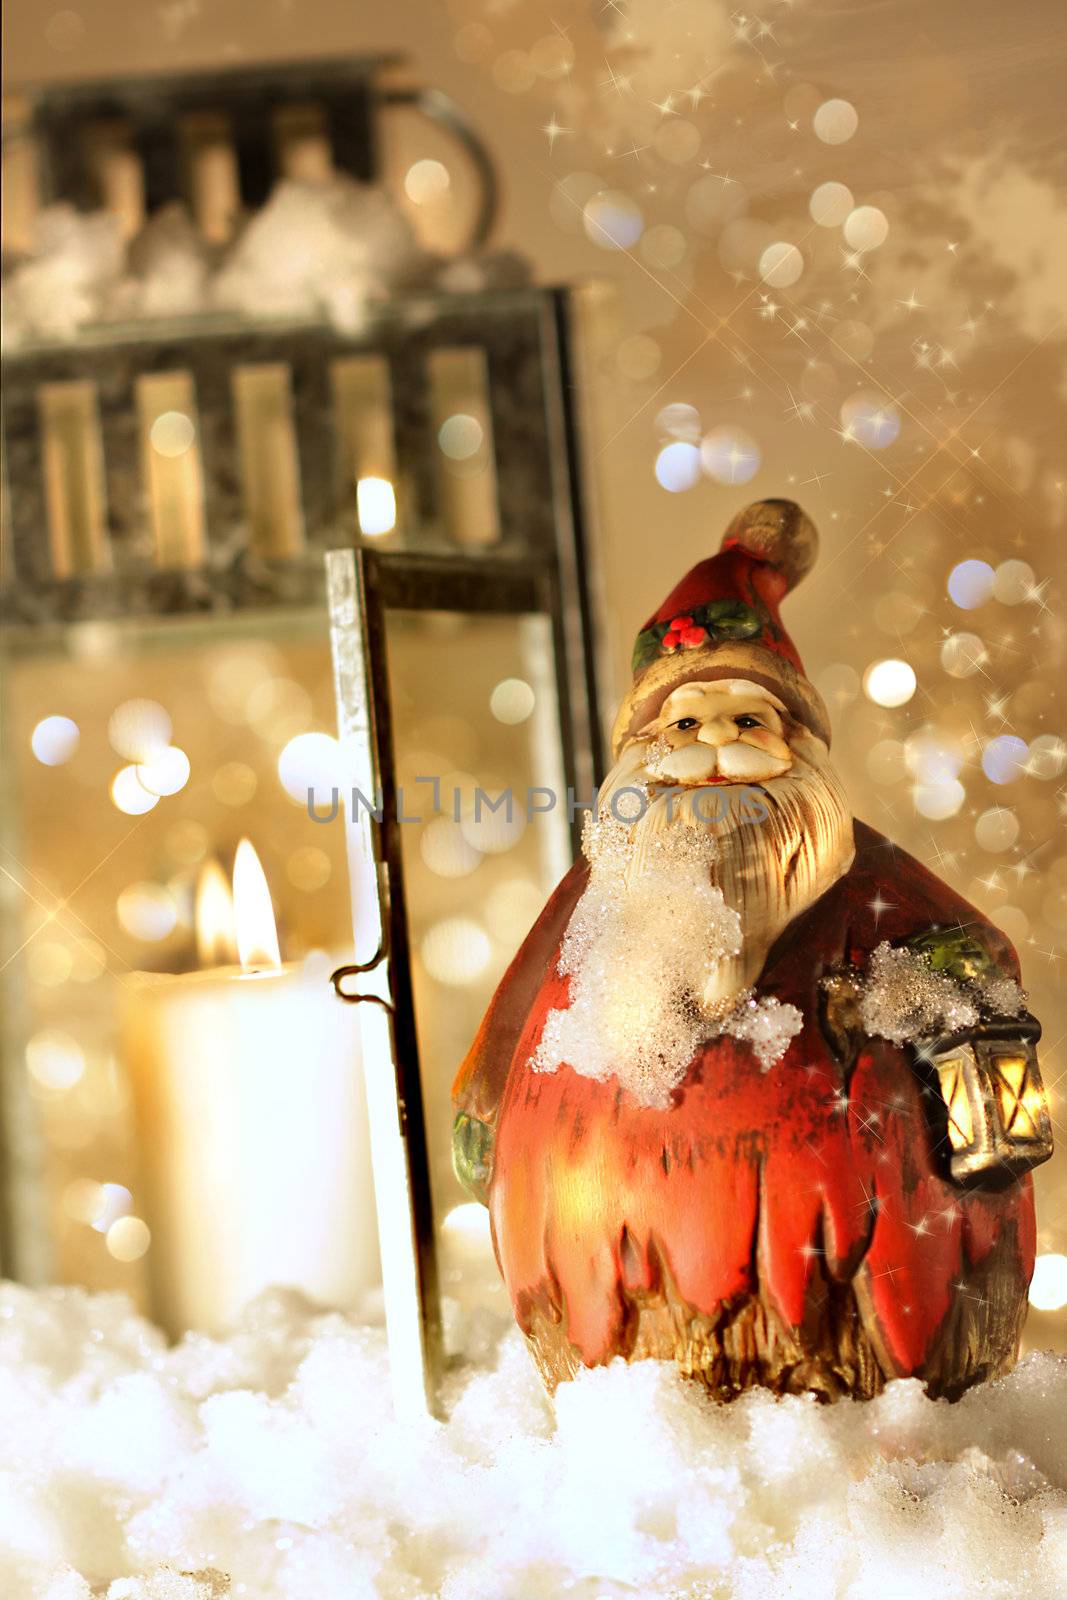 Brightly lit lantern in the snow with little Santa